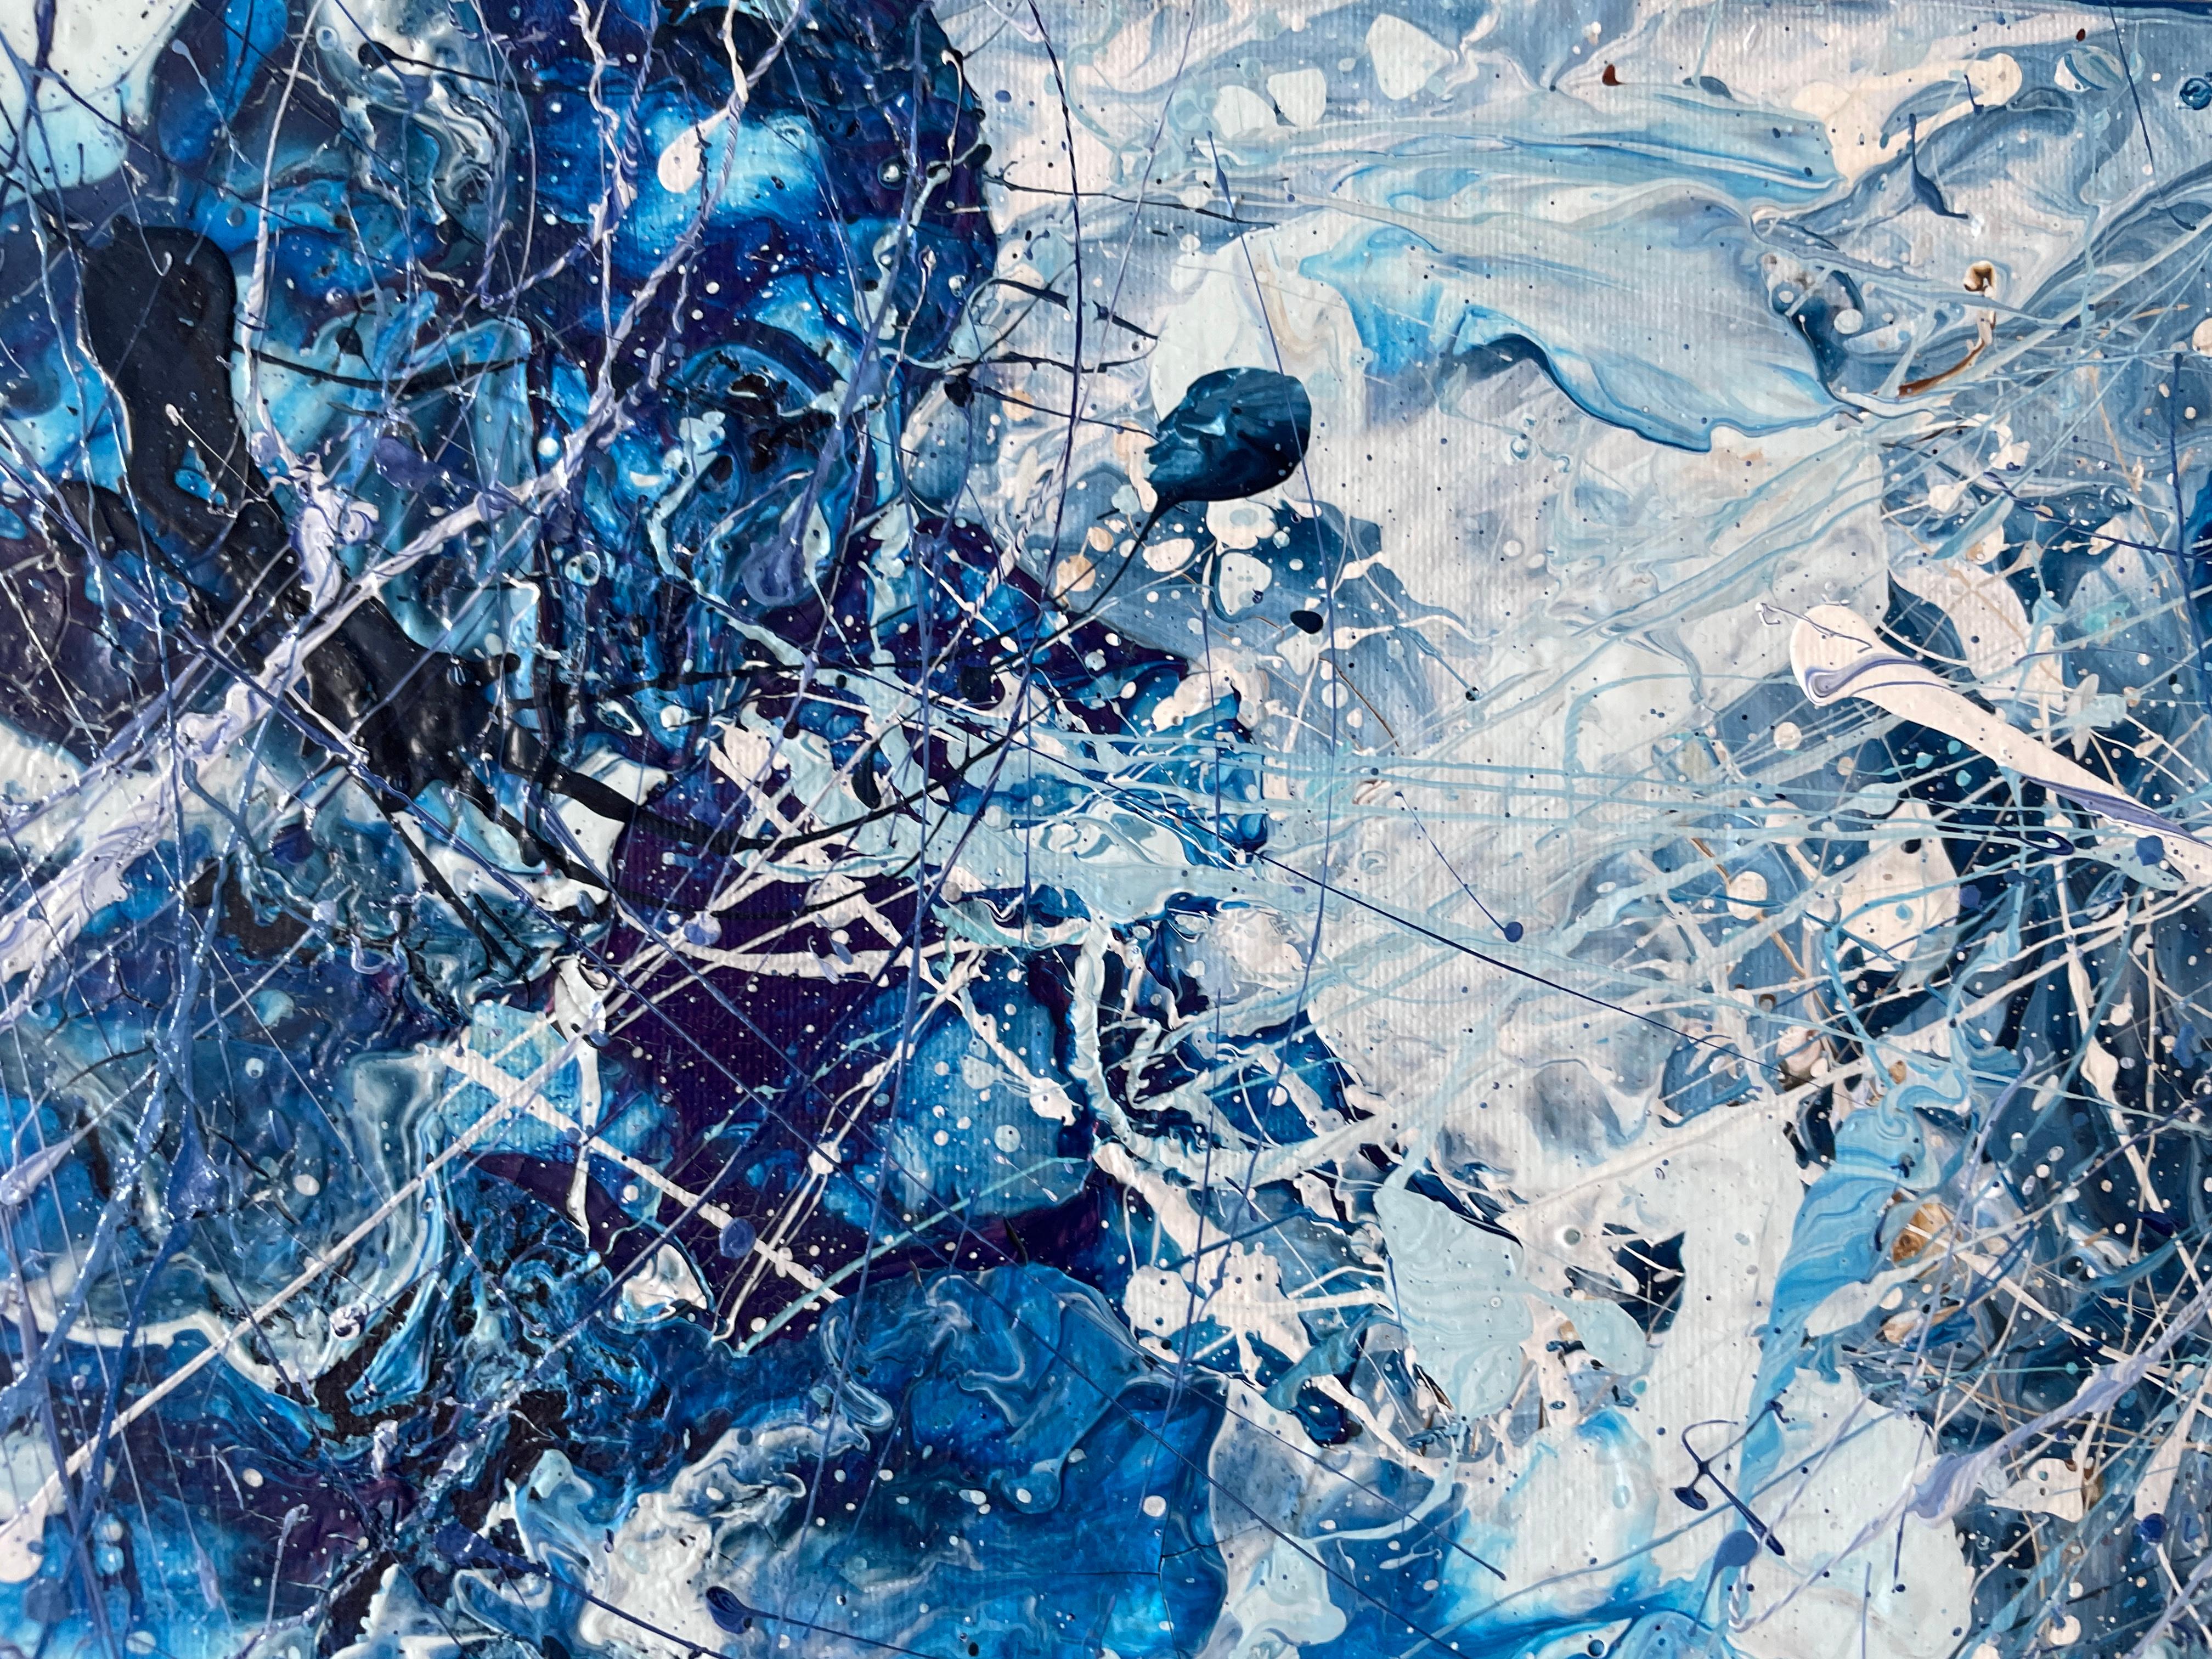 
In this expressive piece of action painting, a whirlwind of captivating blues merges to bring to life a stunning seascape in turmoil. The intense shades of blue, from deep sapphire to vibrant turquoise, shape tumultuous waves rising with strength